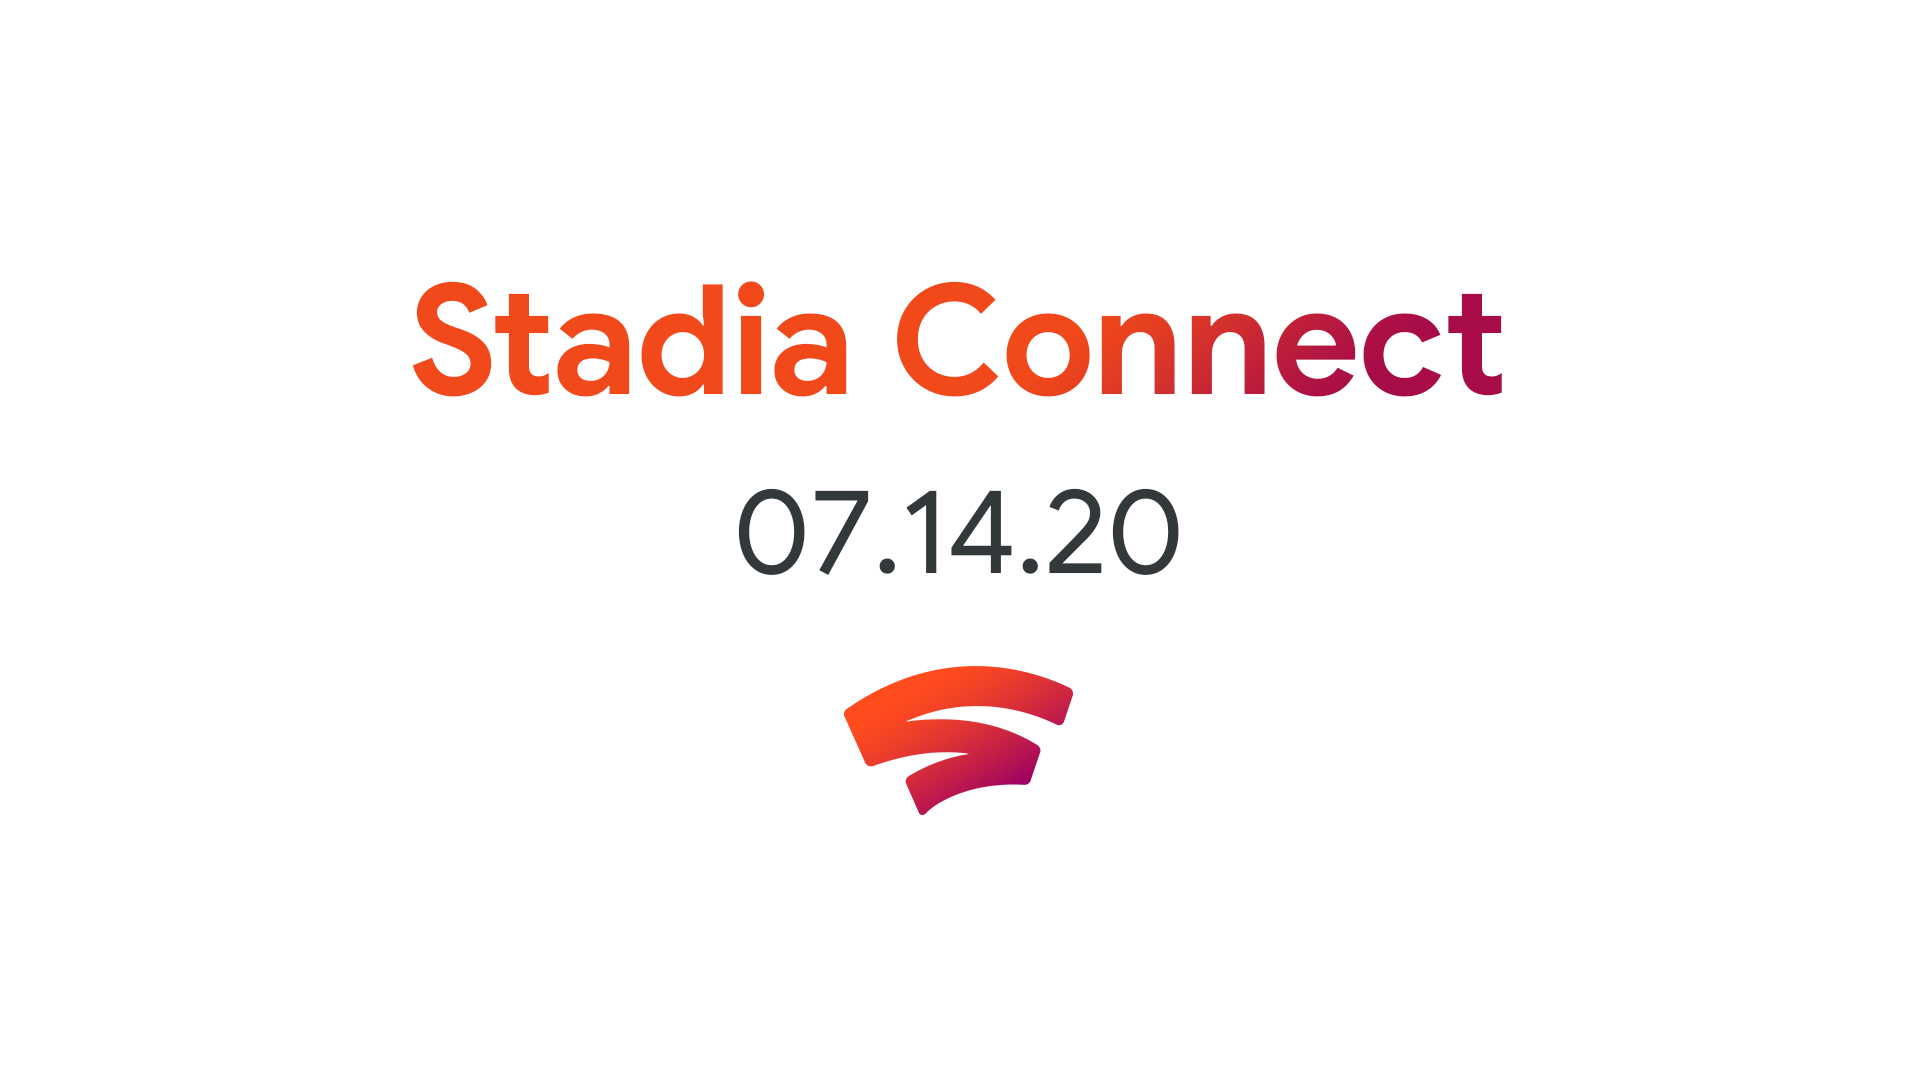 Stadia Connect announced for July